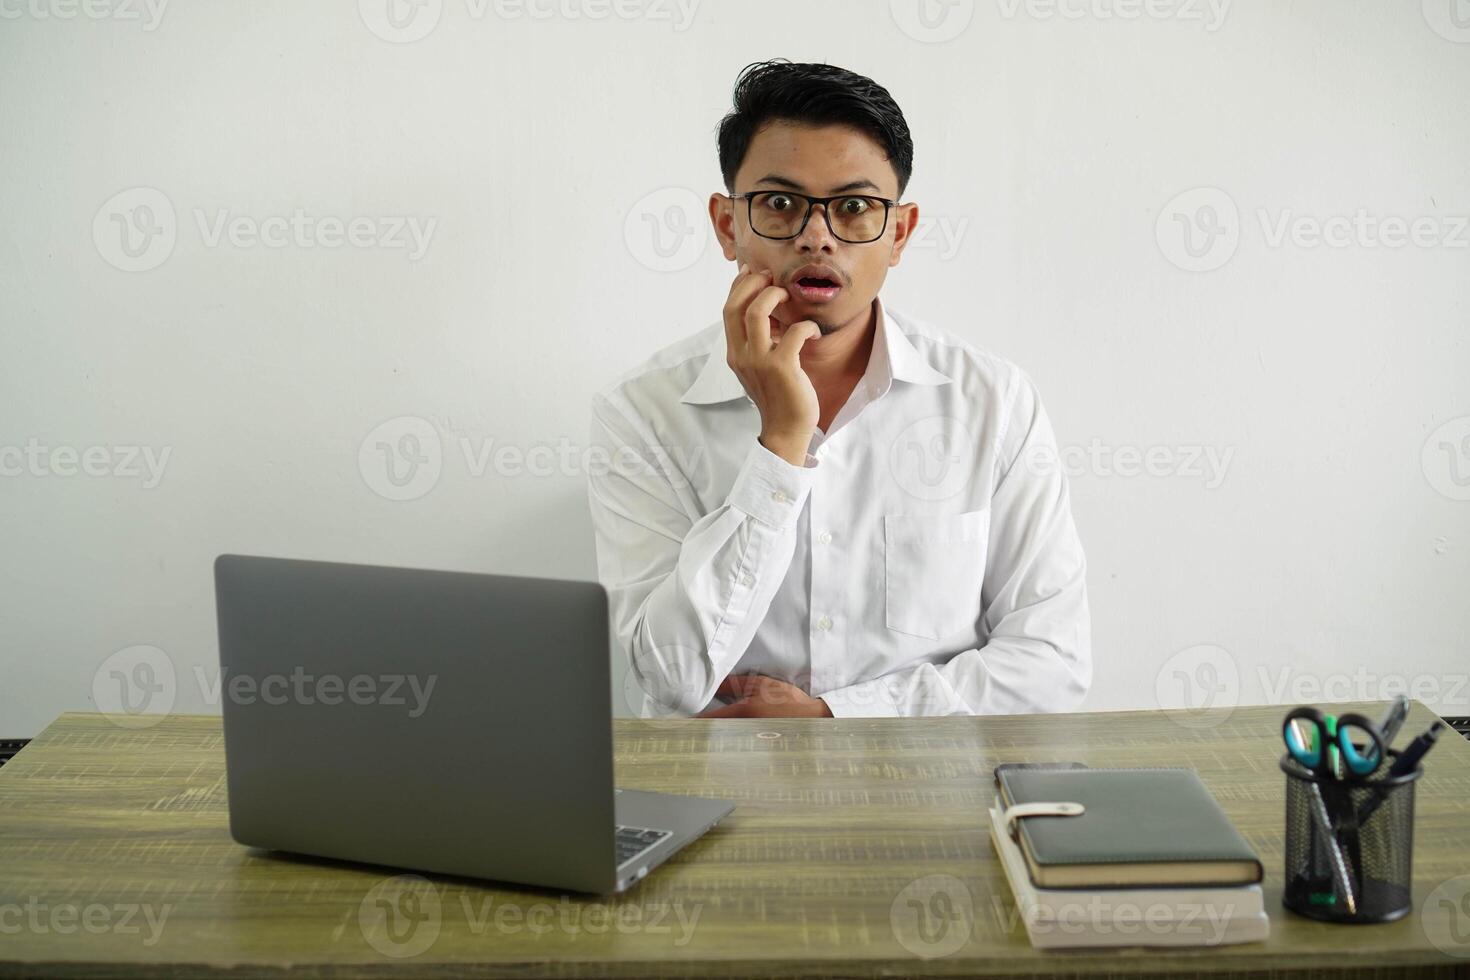 young asian businessman in a workplace surprised and shocked while looking right, wear white shirt with glasses isolated photo